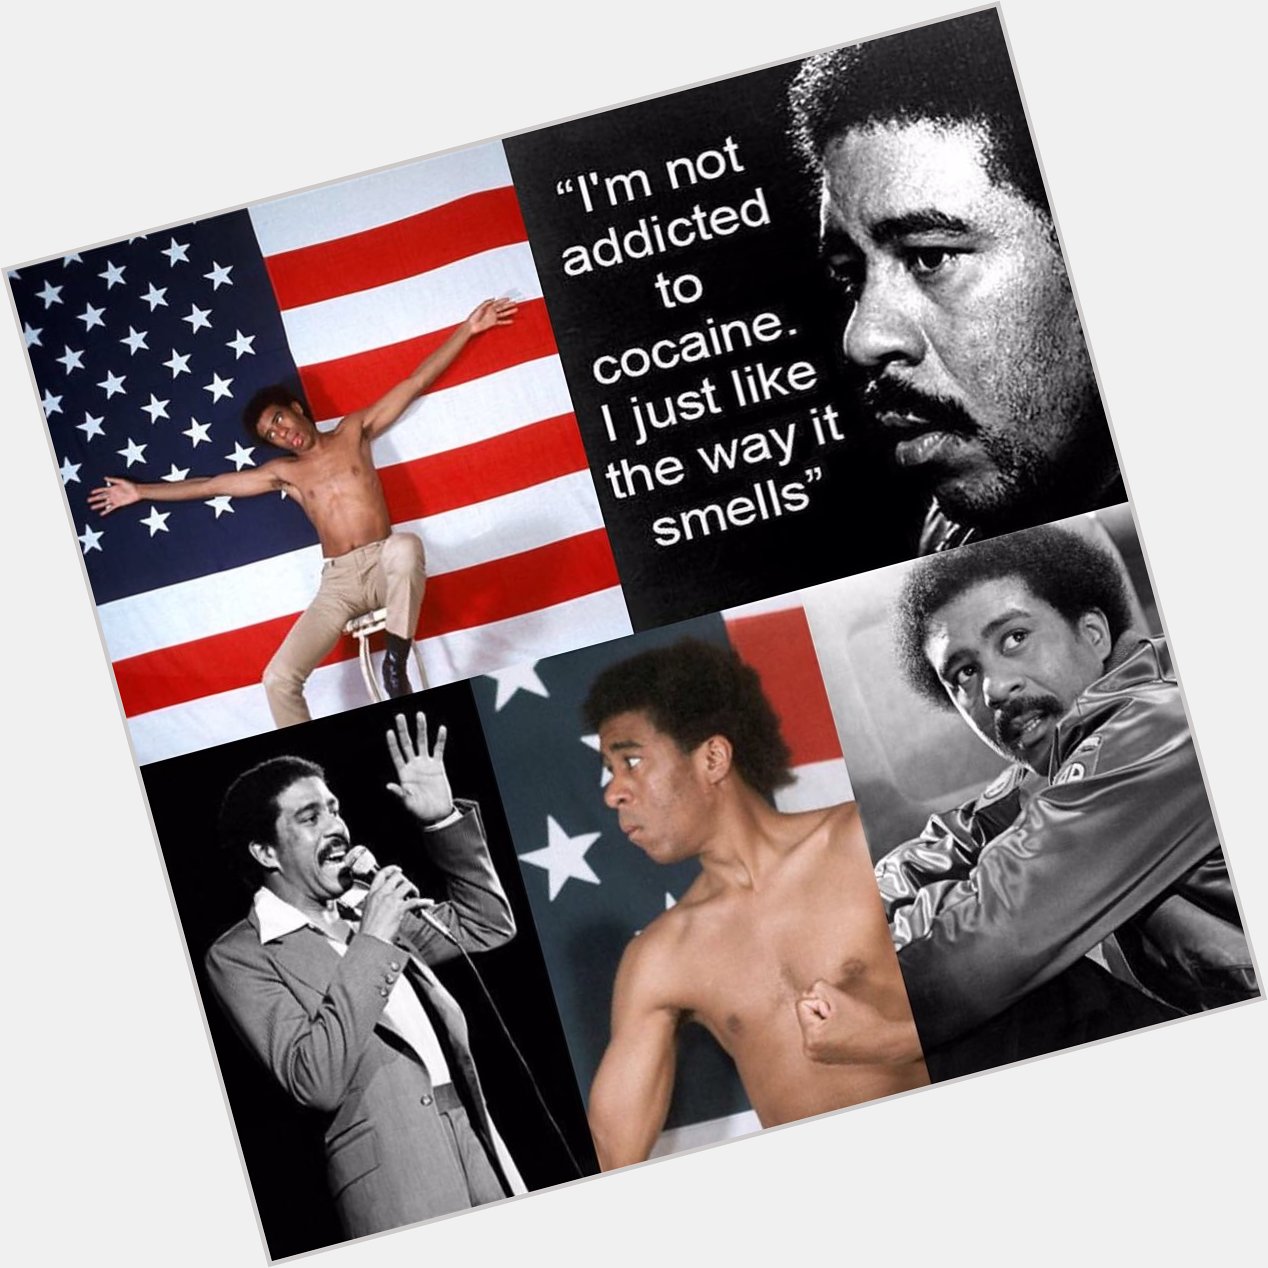 Happy, happy birthday in heaven to one of the funniest man that ever was; Richard Pryor 